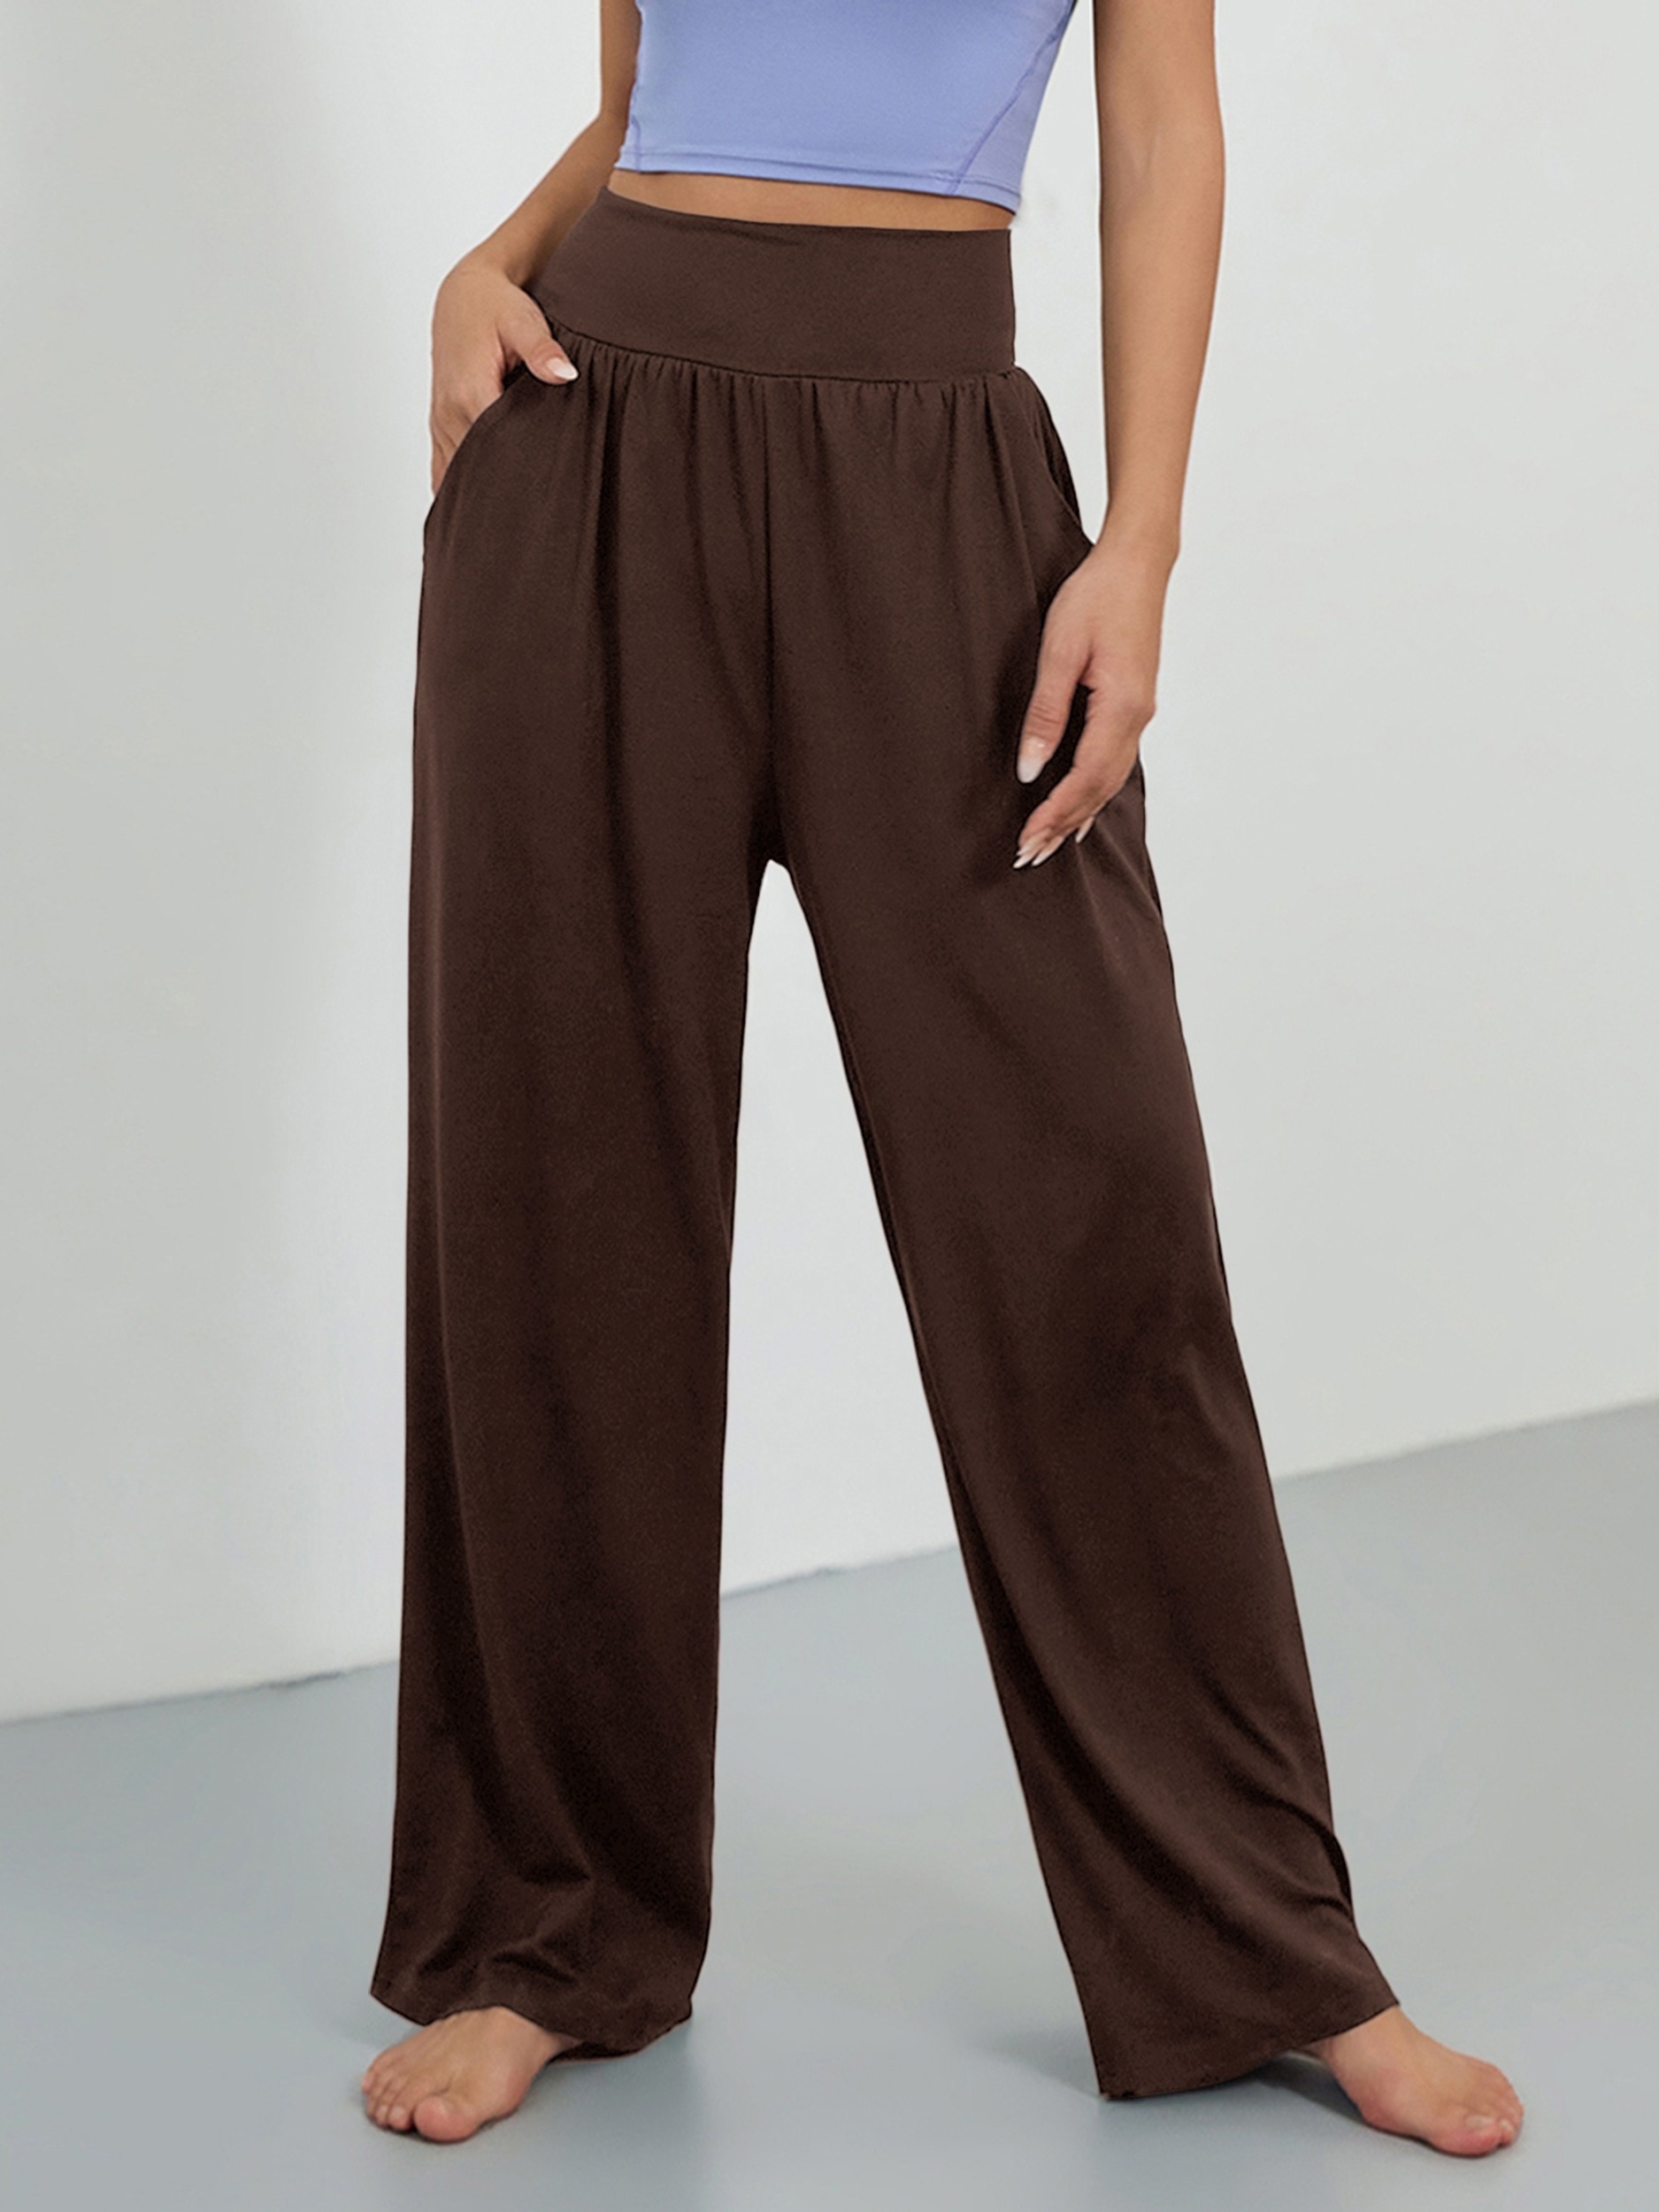 Comfy Lounge Pants for Women with Pockets